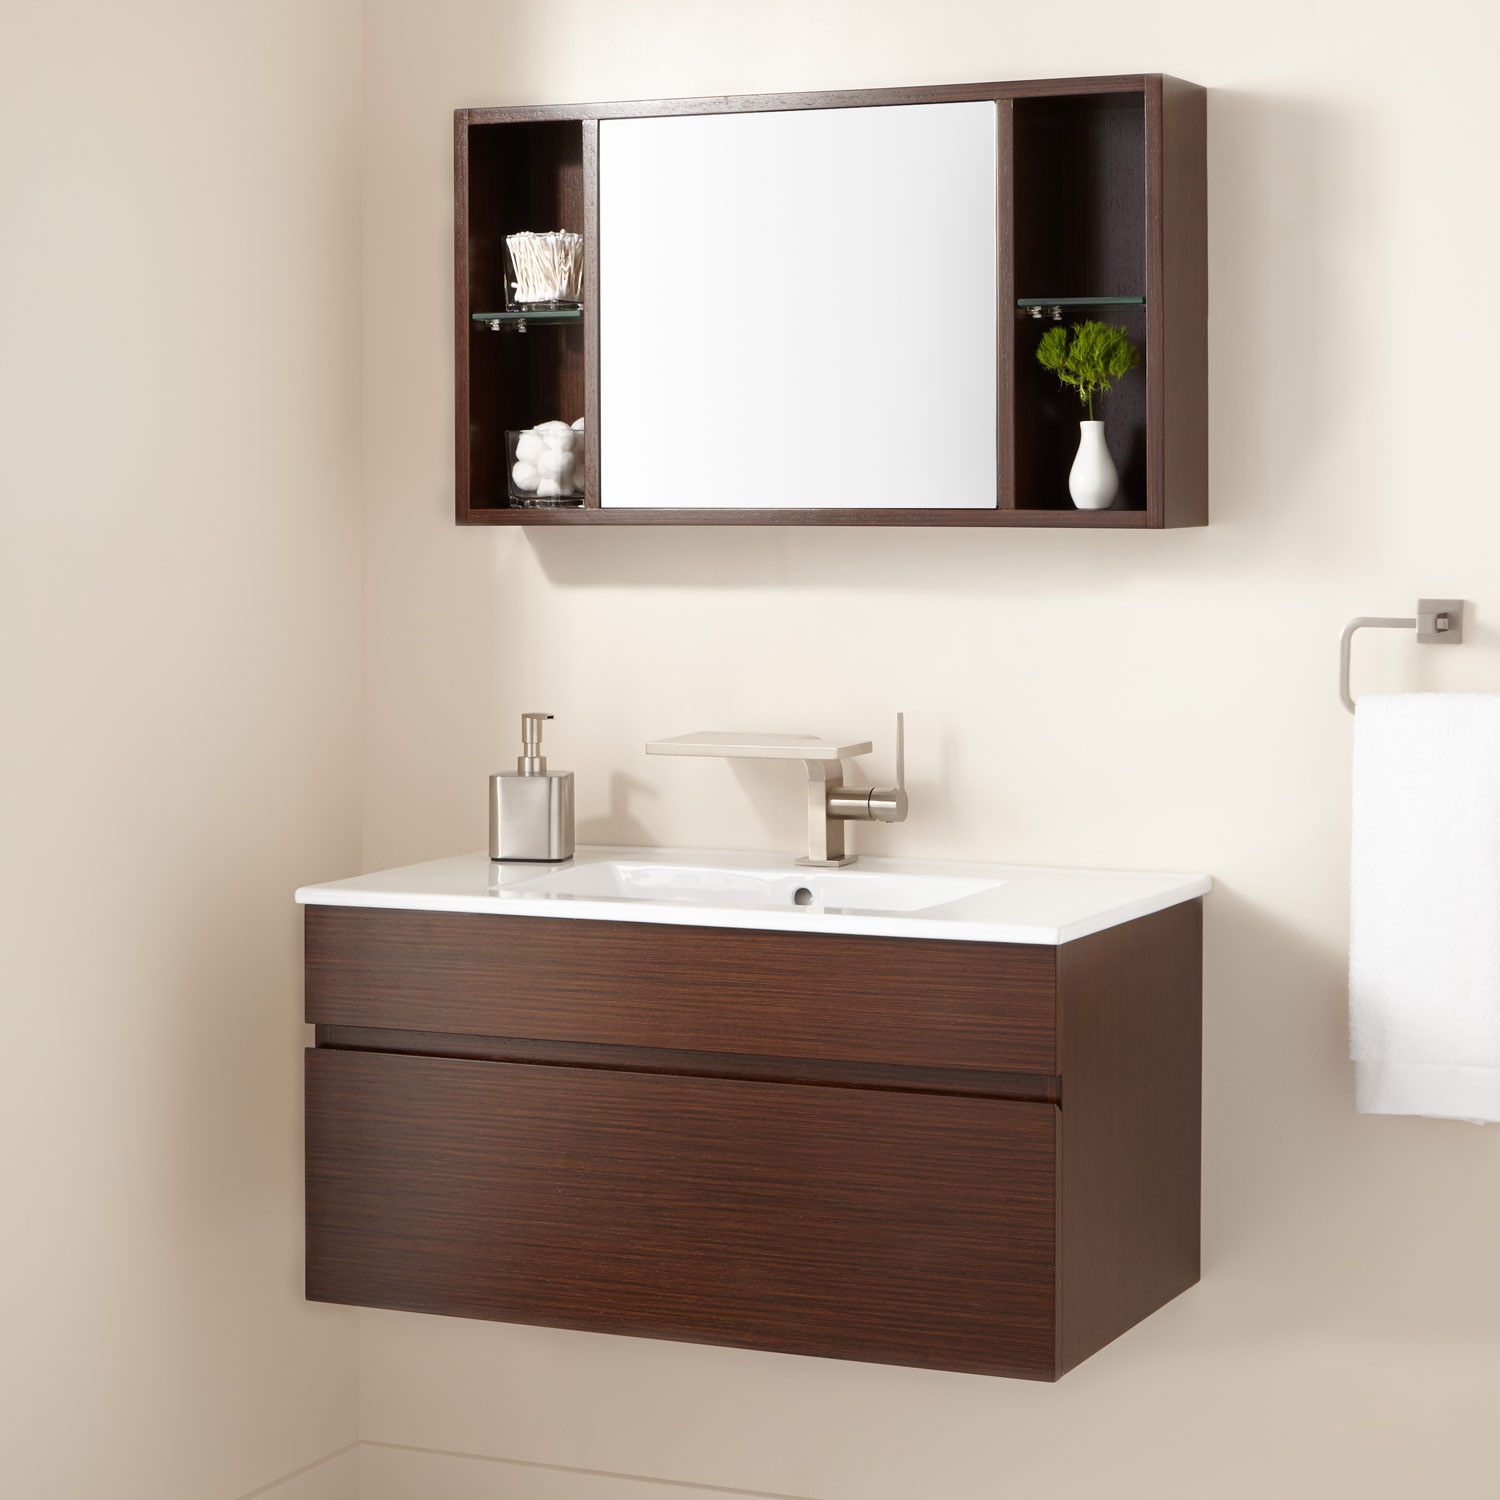 Wall Mount Bathroom Cabinet
 Signature Hardware 33" Dimitri Wenge Wall Mount Vanity and